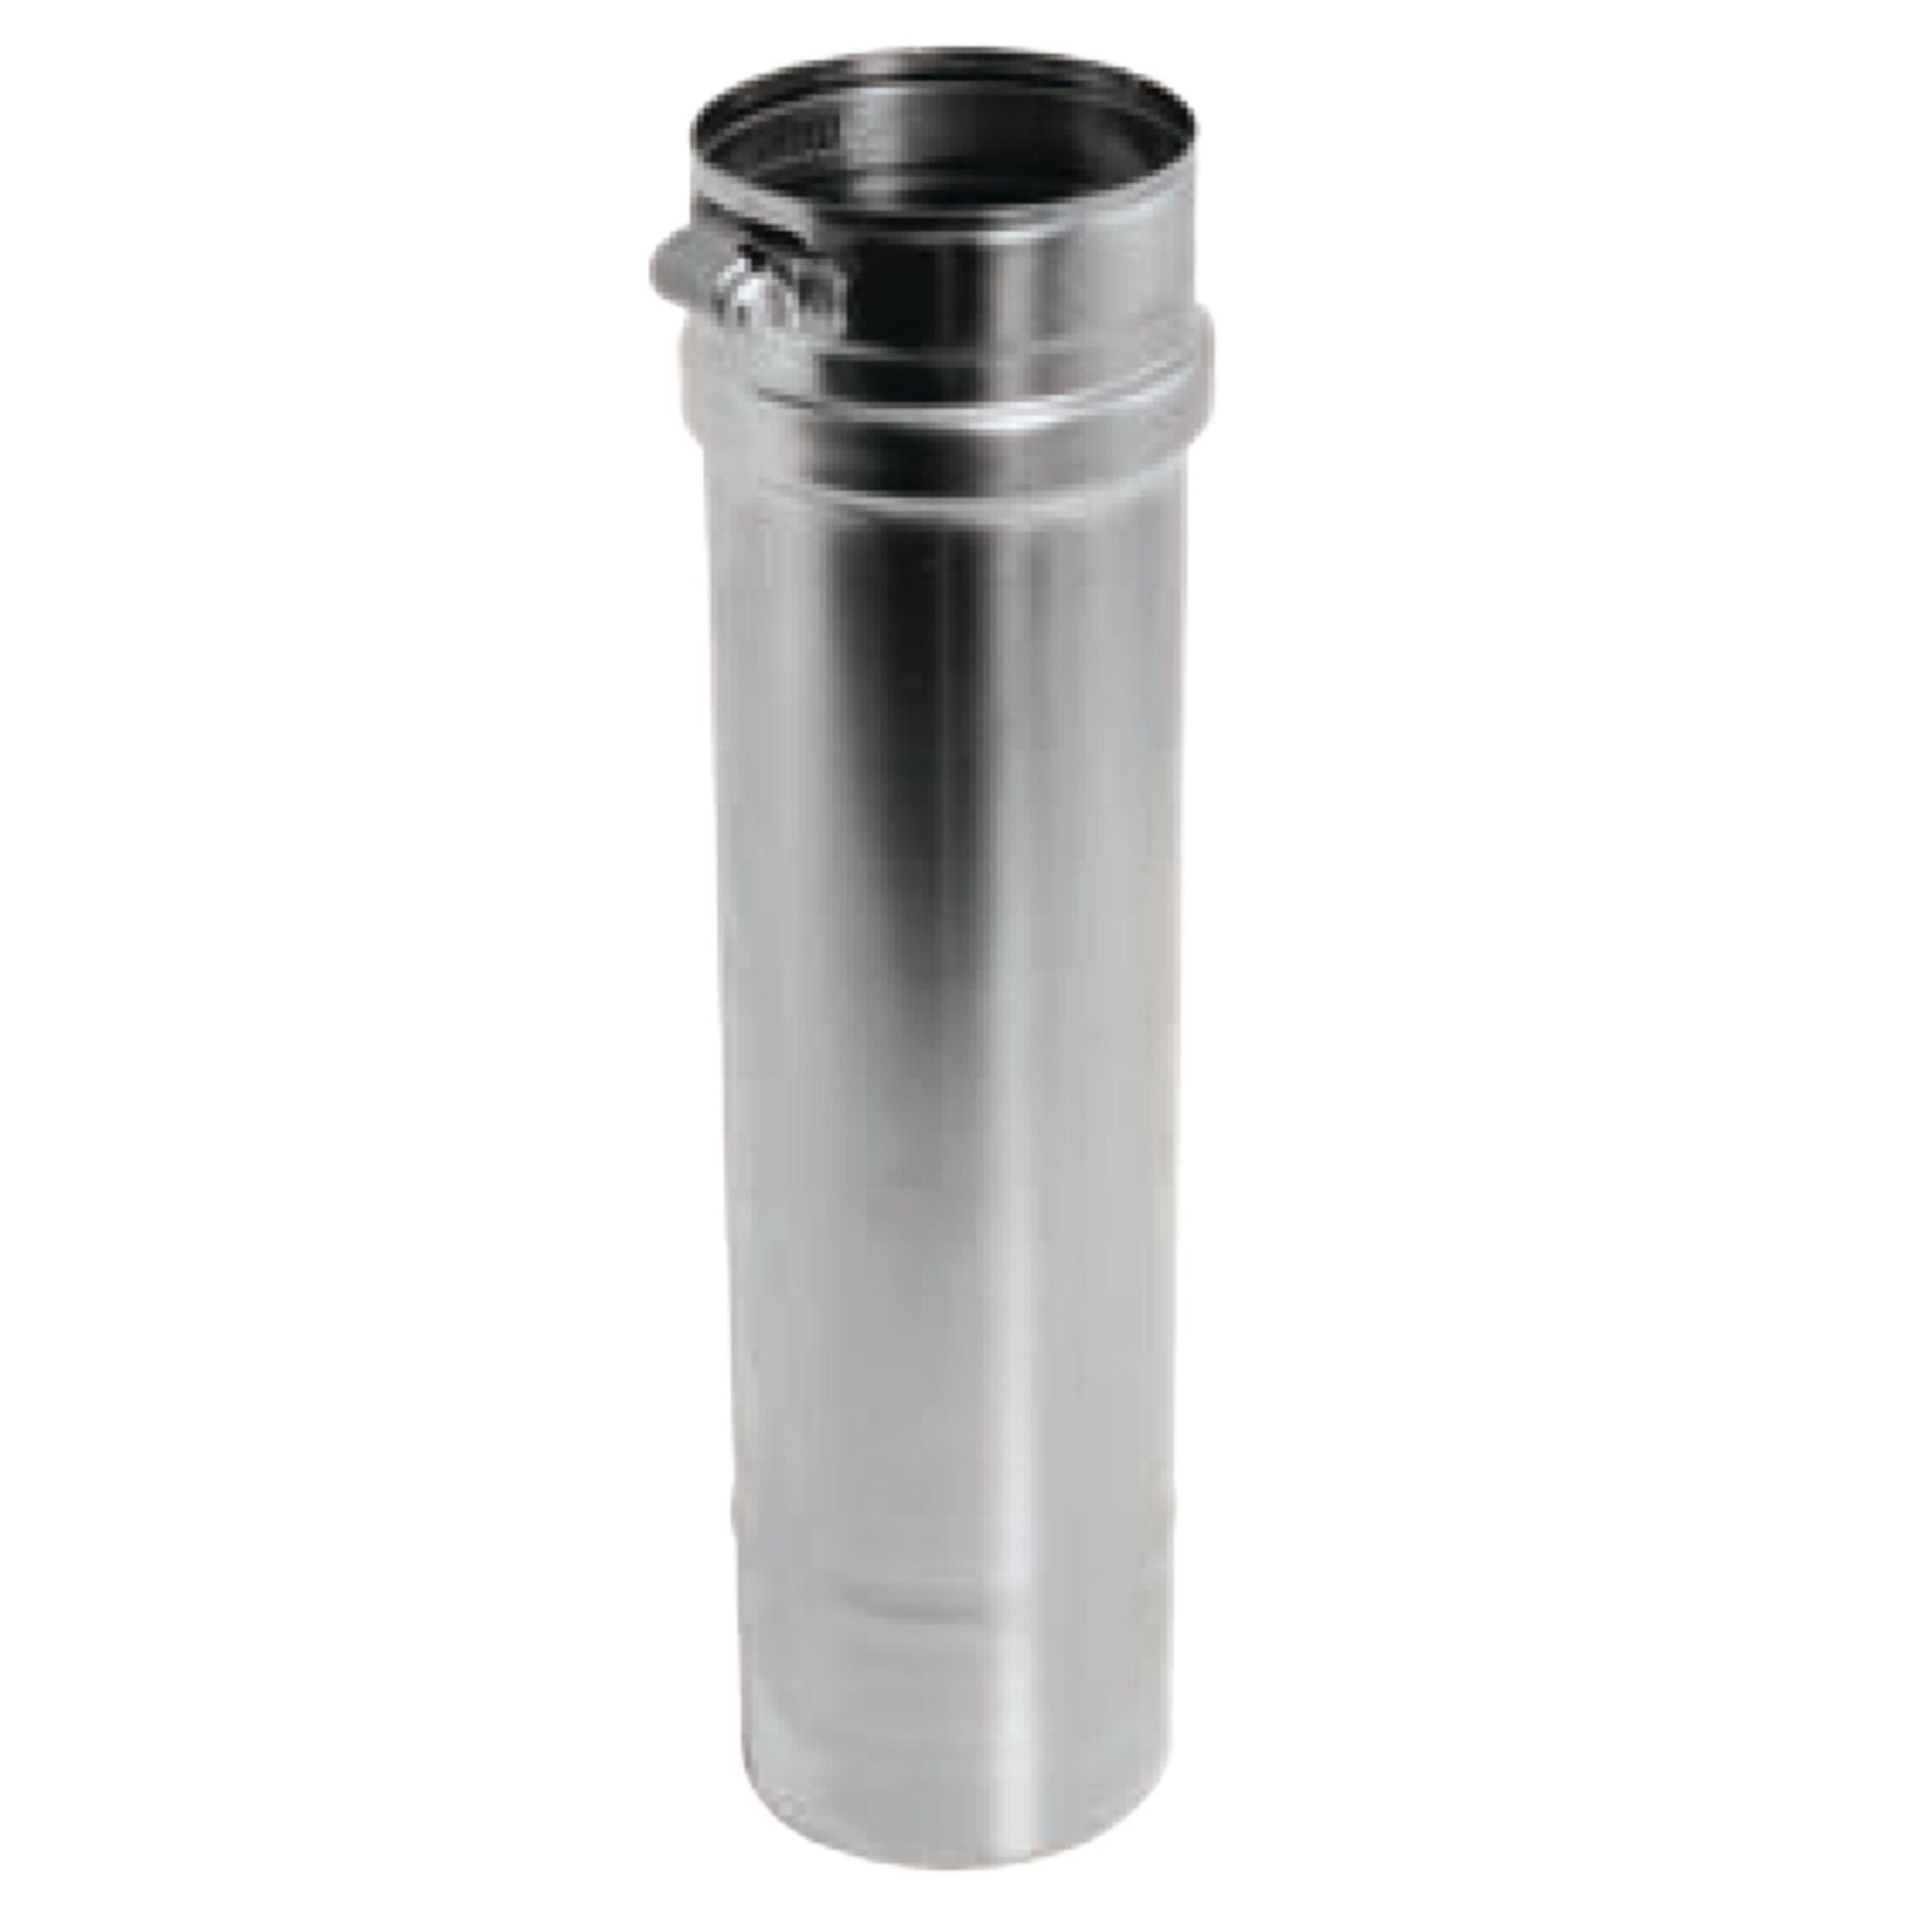 DuraVent FasNSeal 7" x 6" 316L Stainless Steel Vent Length